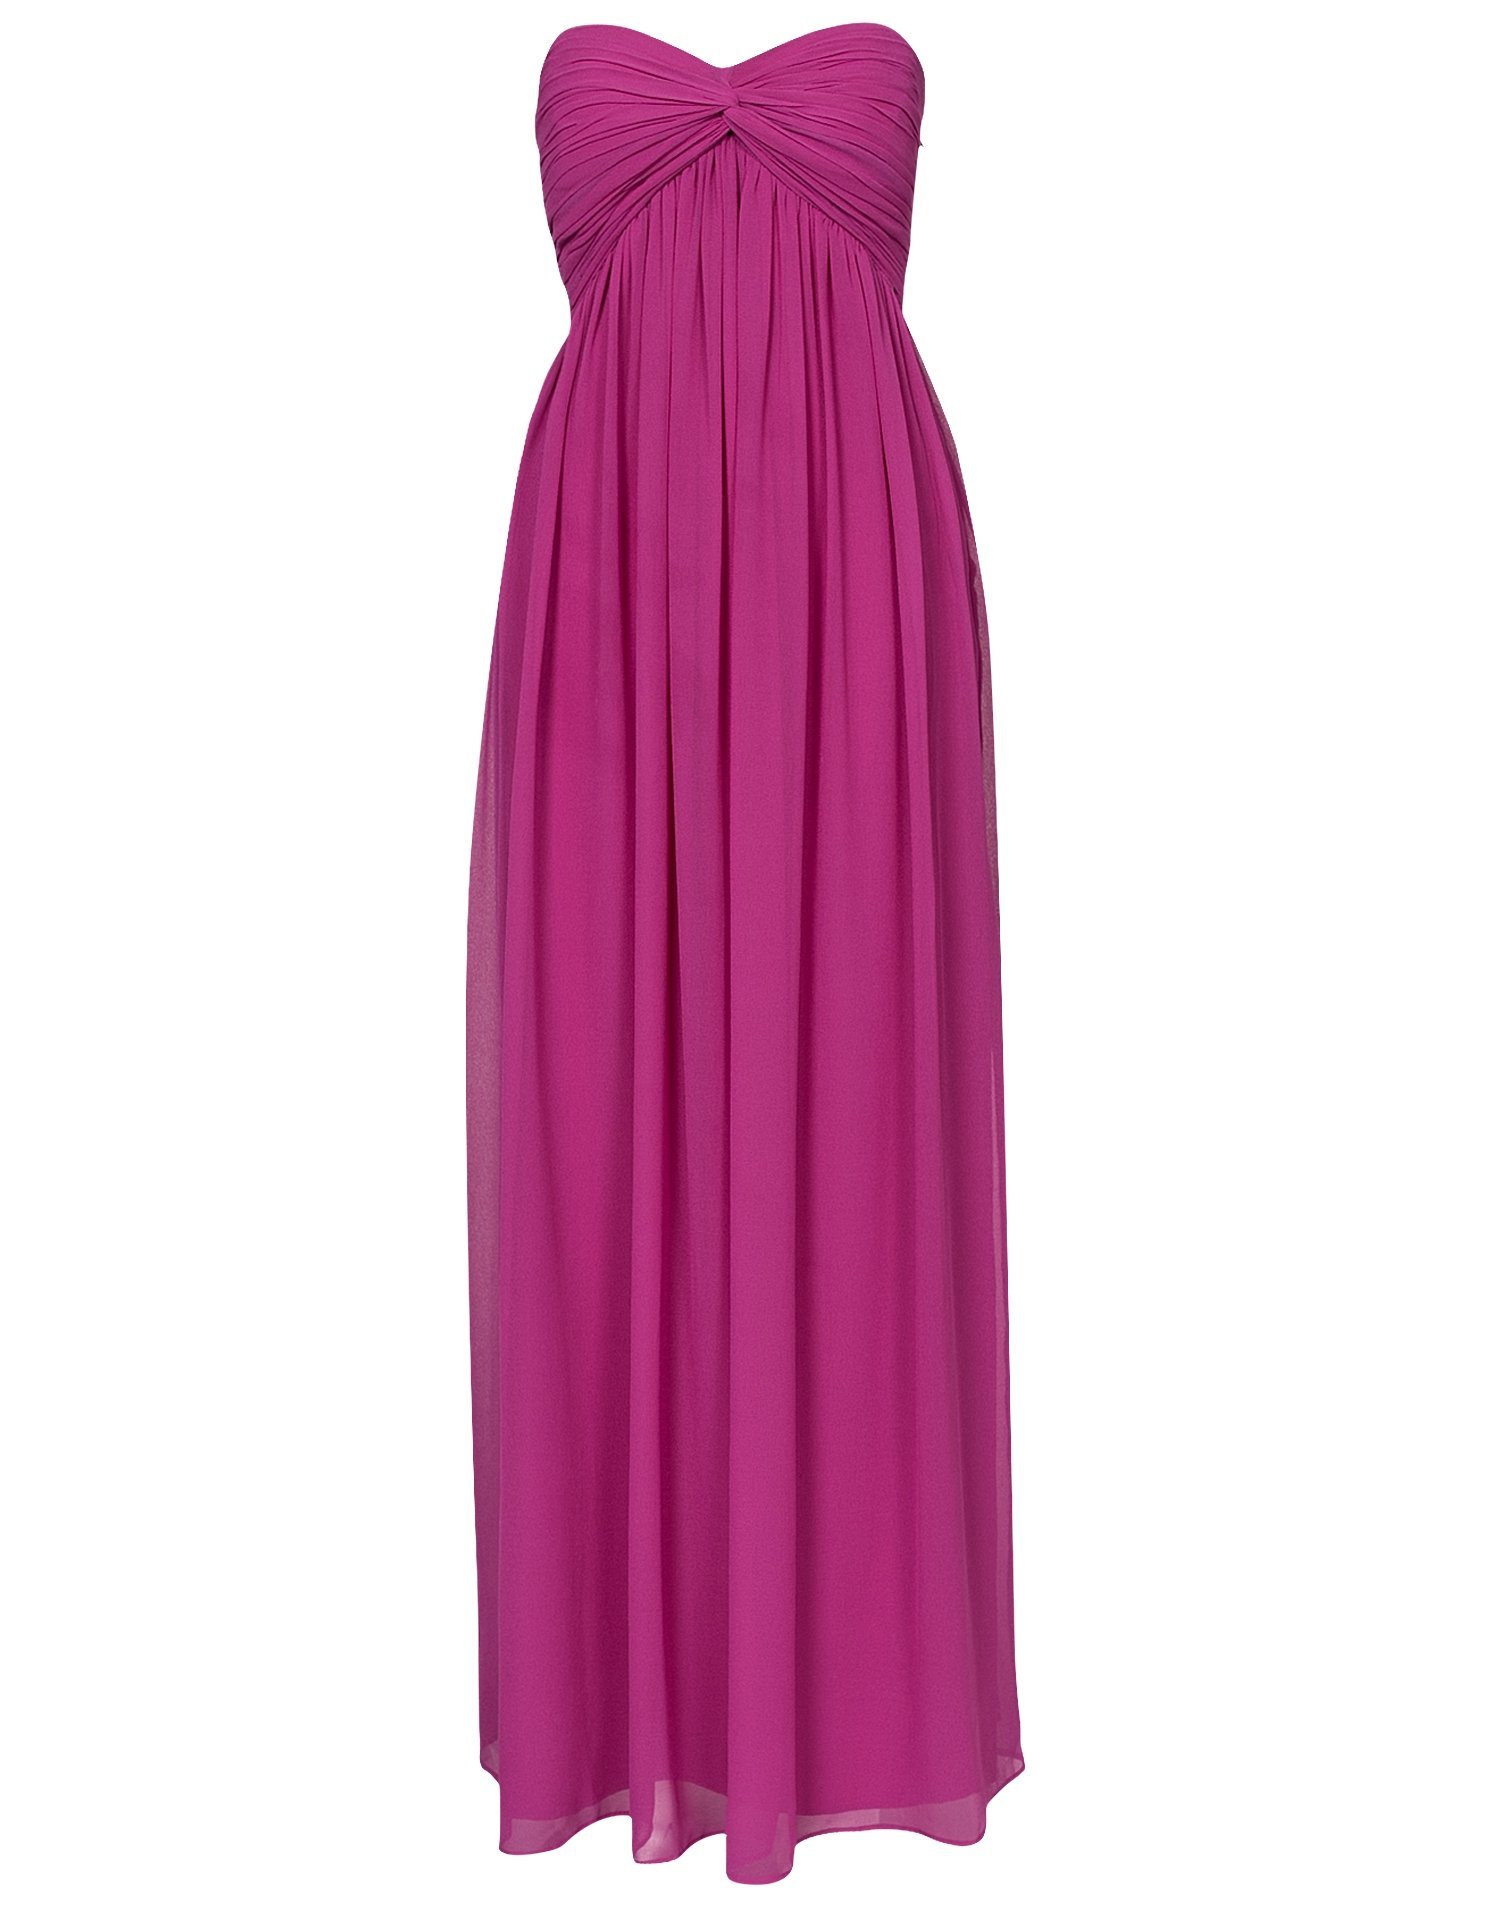 Dreamy Dress - Nly Trend - Fuchsia - Party Dresses - Clothing - Women ...